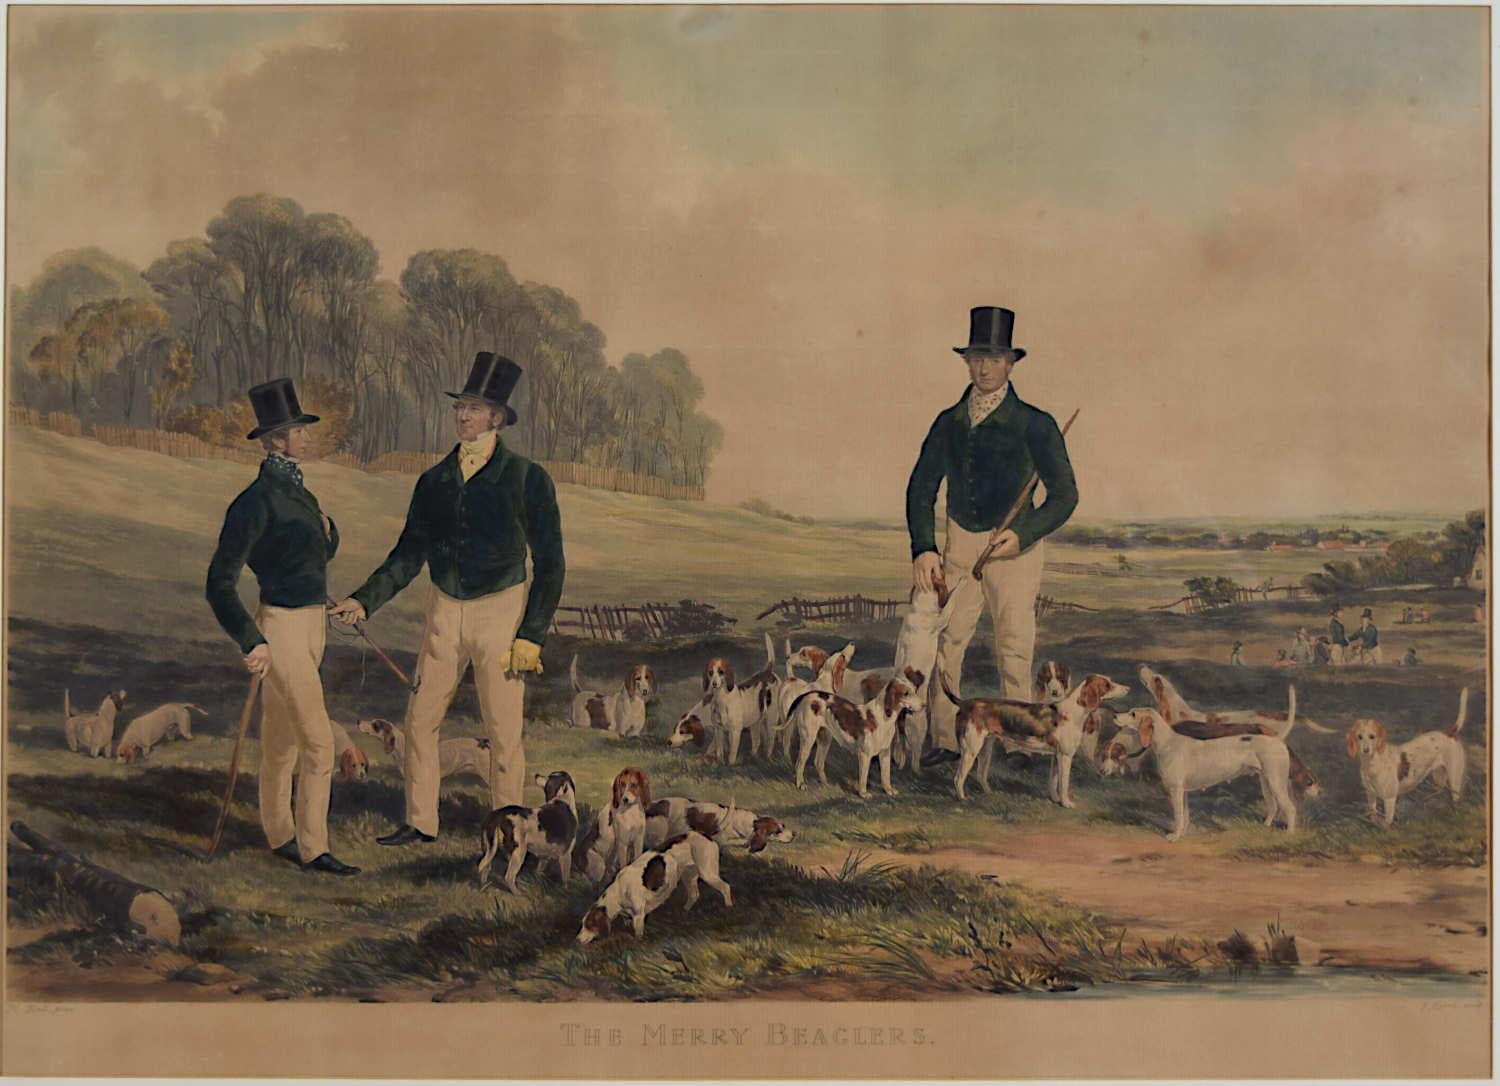 The Merry Beaglers engraving by John Harris after Harry Hall's 1845 painting